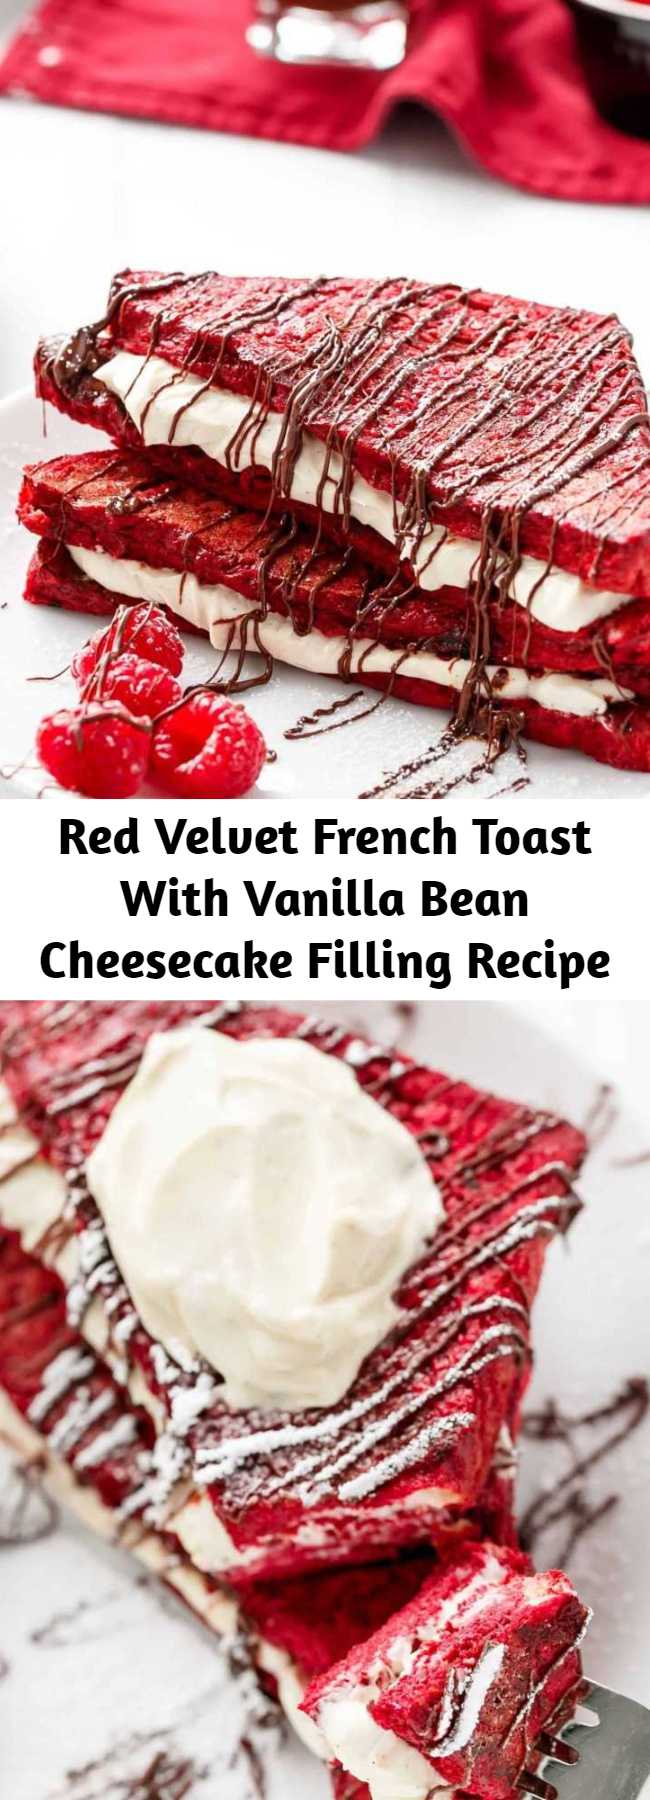 Red Velvet French Toast With Vanilla Bean Cheesecake Filling Recipe - Red Velvet made into French Toast and stuffed with a sweet Vanilla Bean Cheesecake filling! The perfect Mother's Day OR Valentine's Day Breakfast!